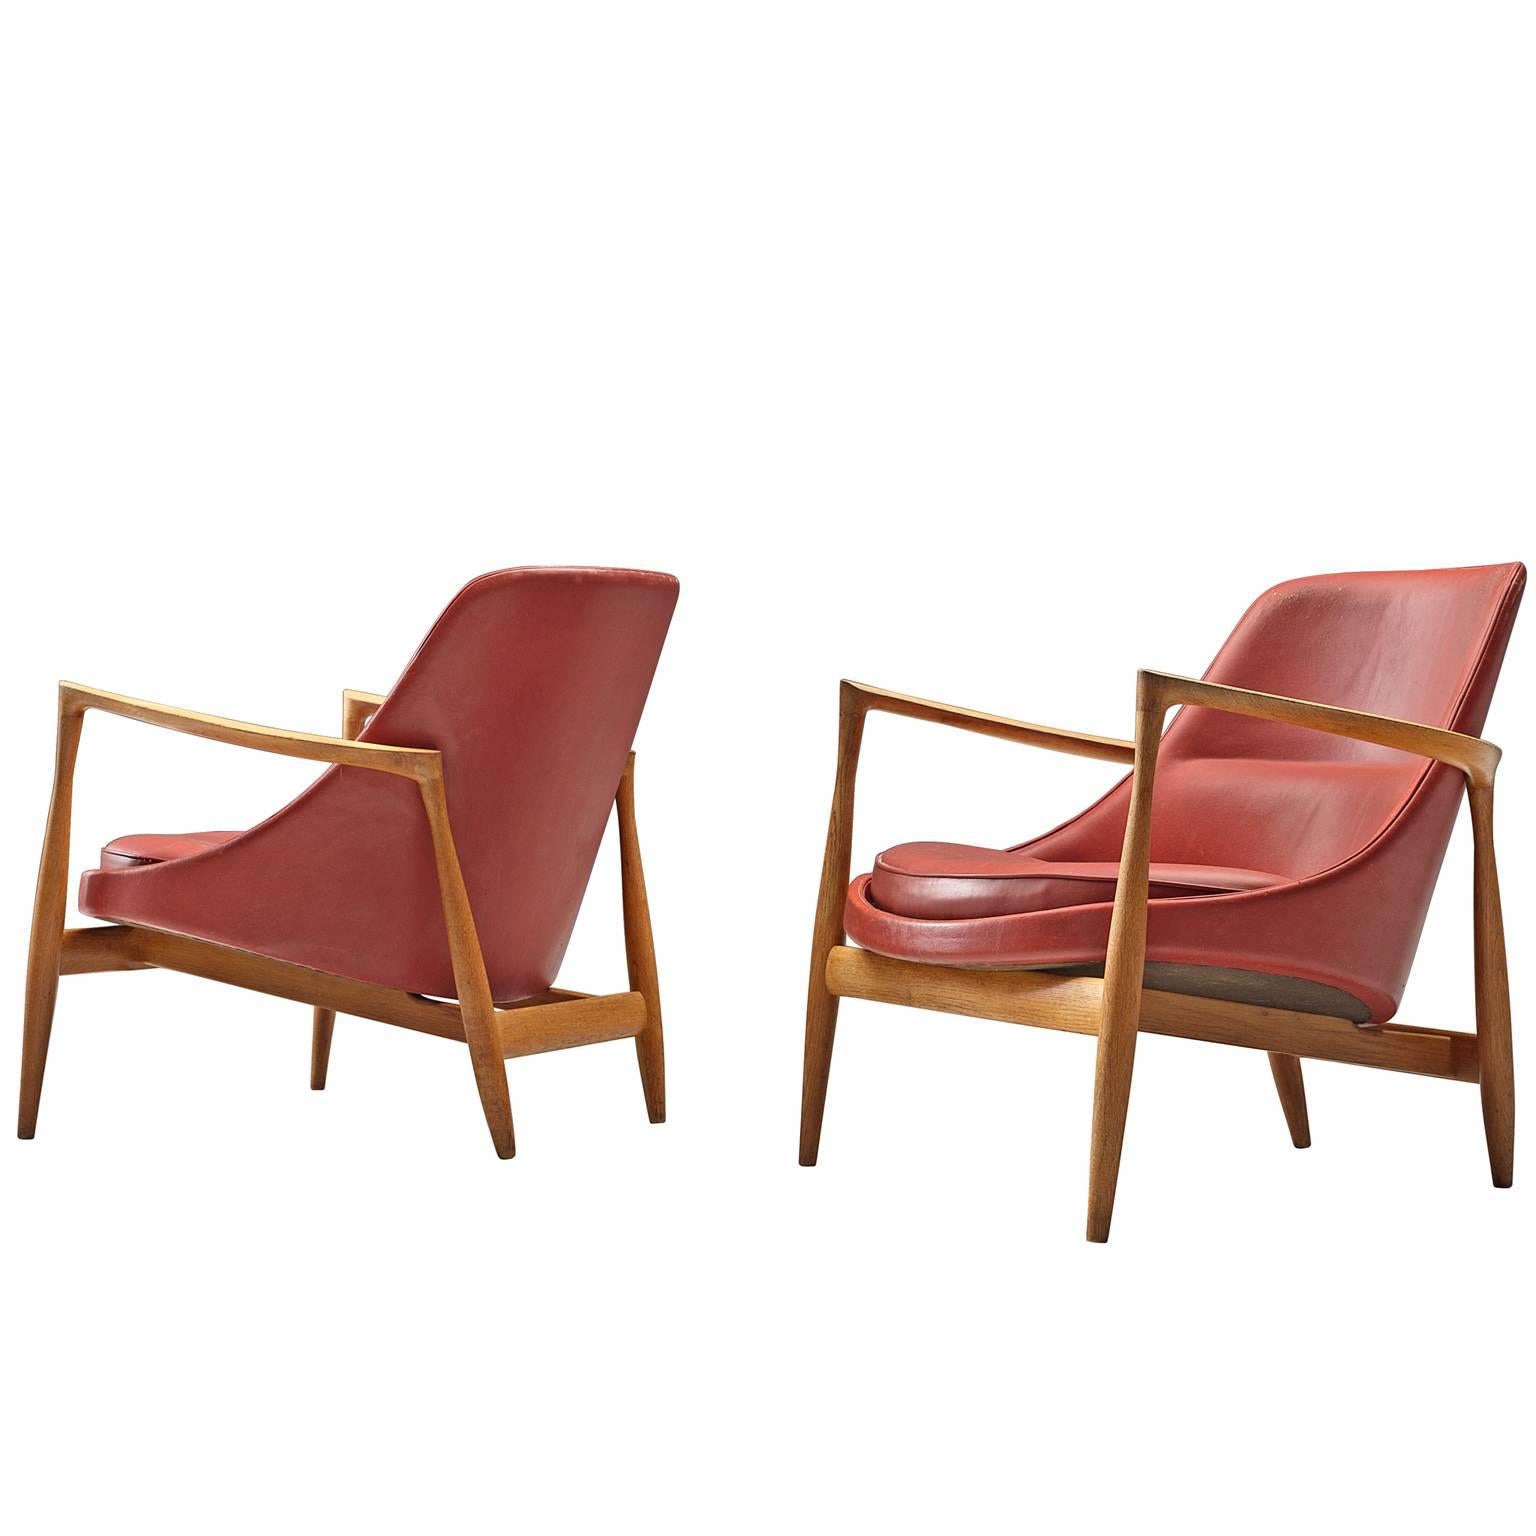 Ib Kofod-Larsen 'Elizabeth' Chairs in Red Leather and Oak